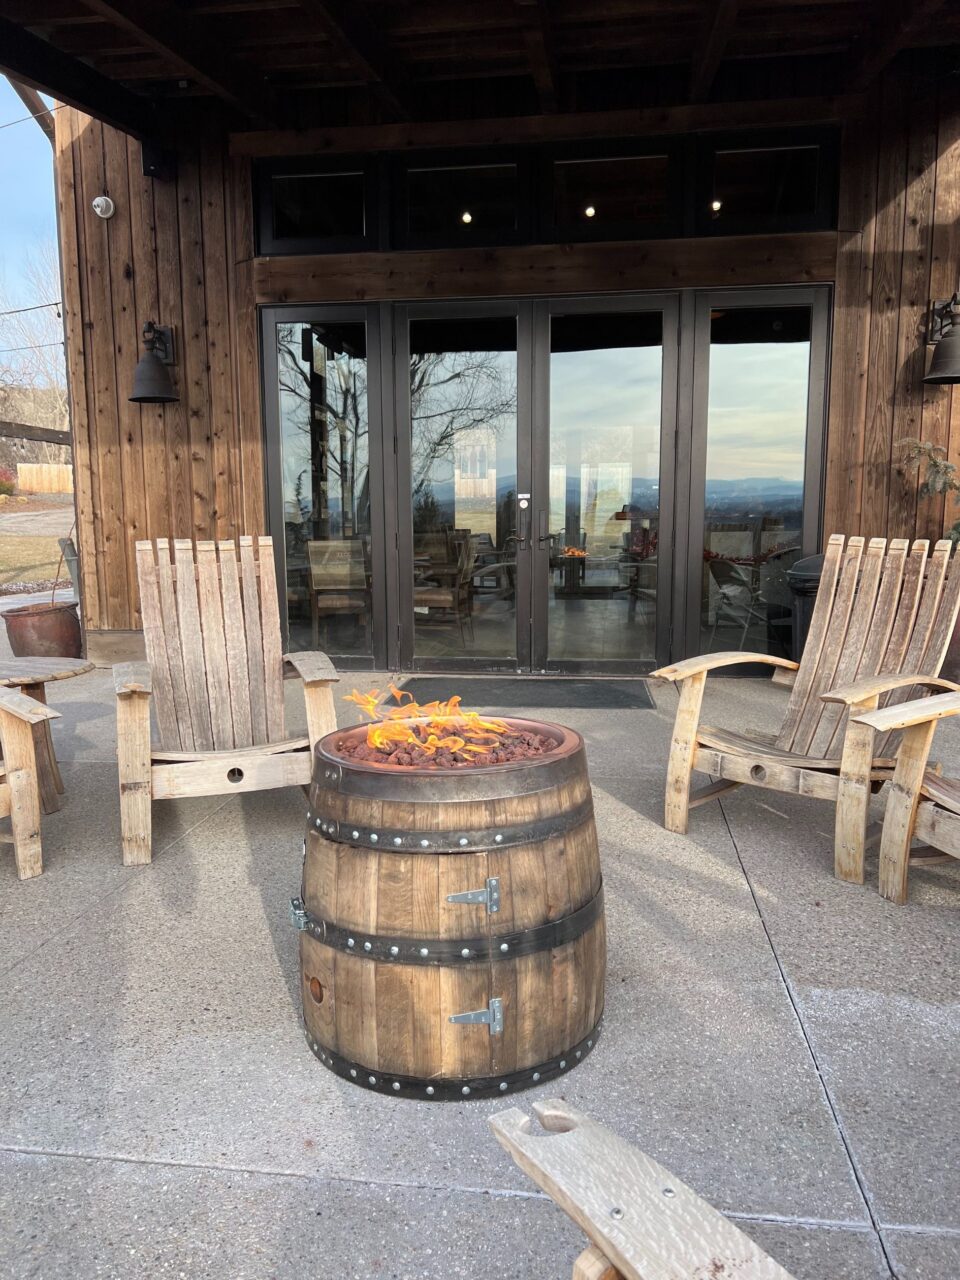 outdoor space at a winery with chairs and a fire barrel